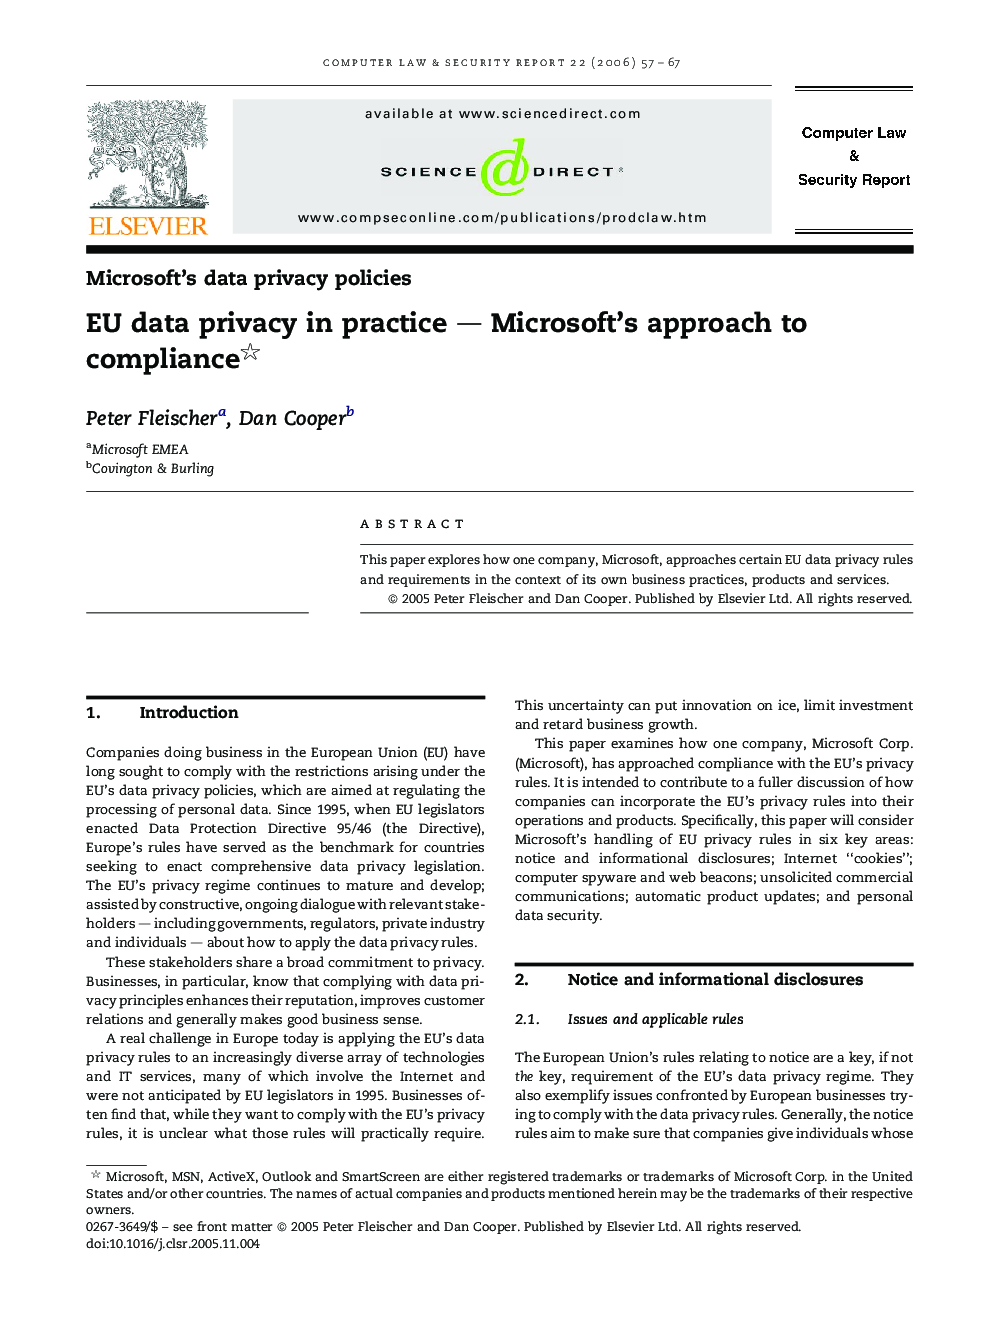 EU data privacy in practice — Microsoft's approach to compliance 